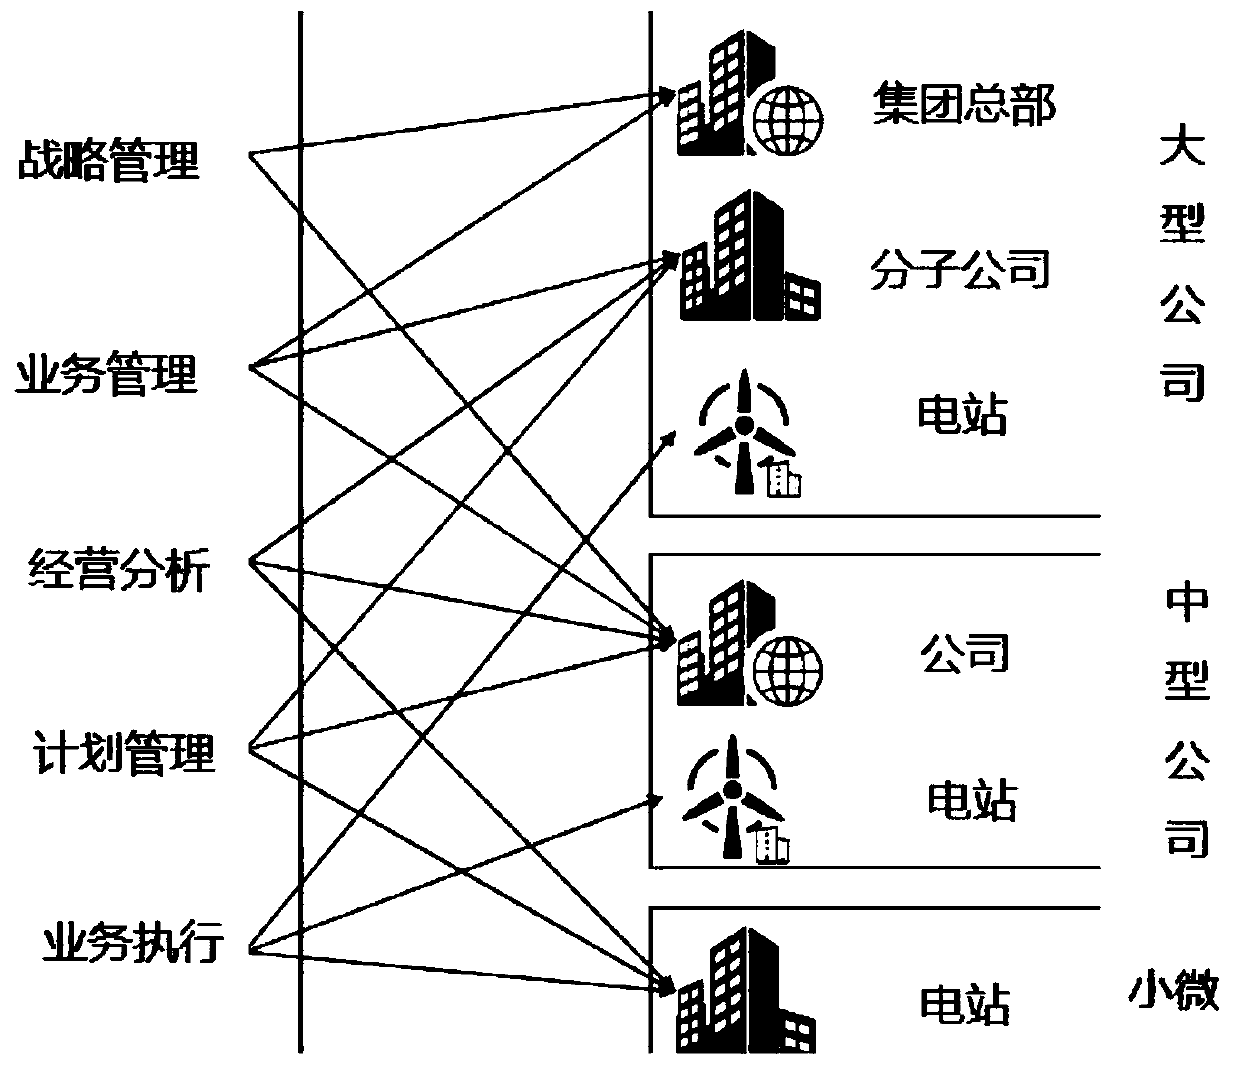 Efficient and safe power distribution network electric energy operation system